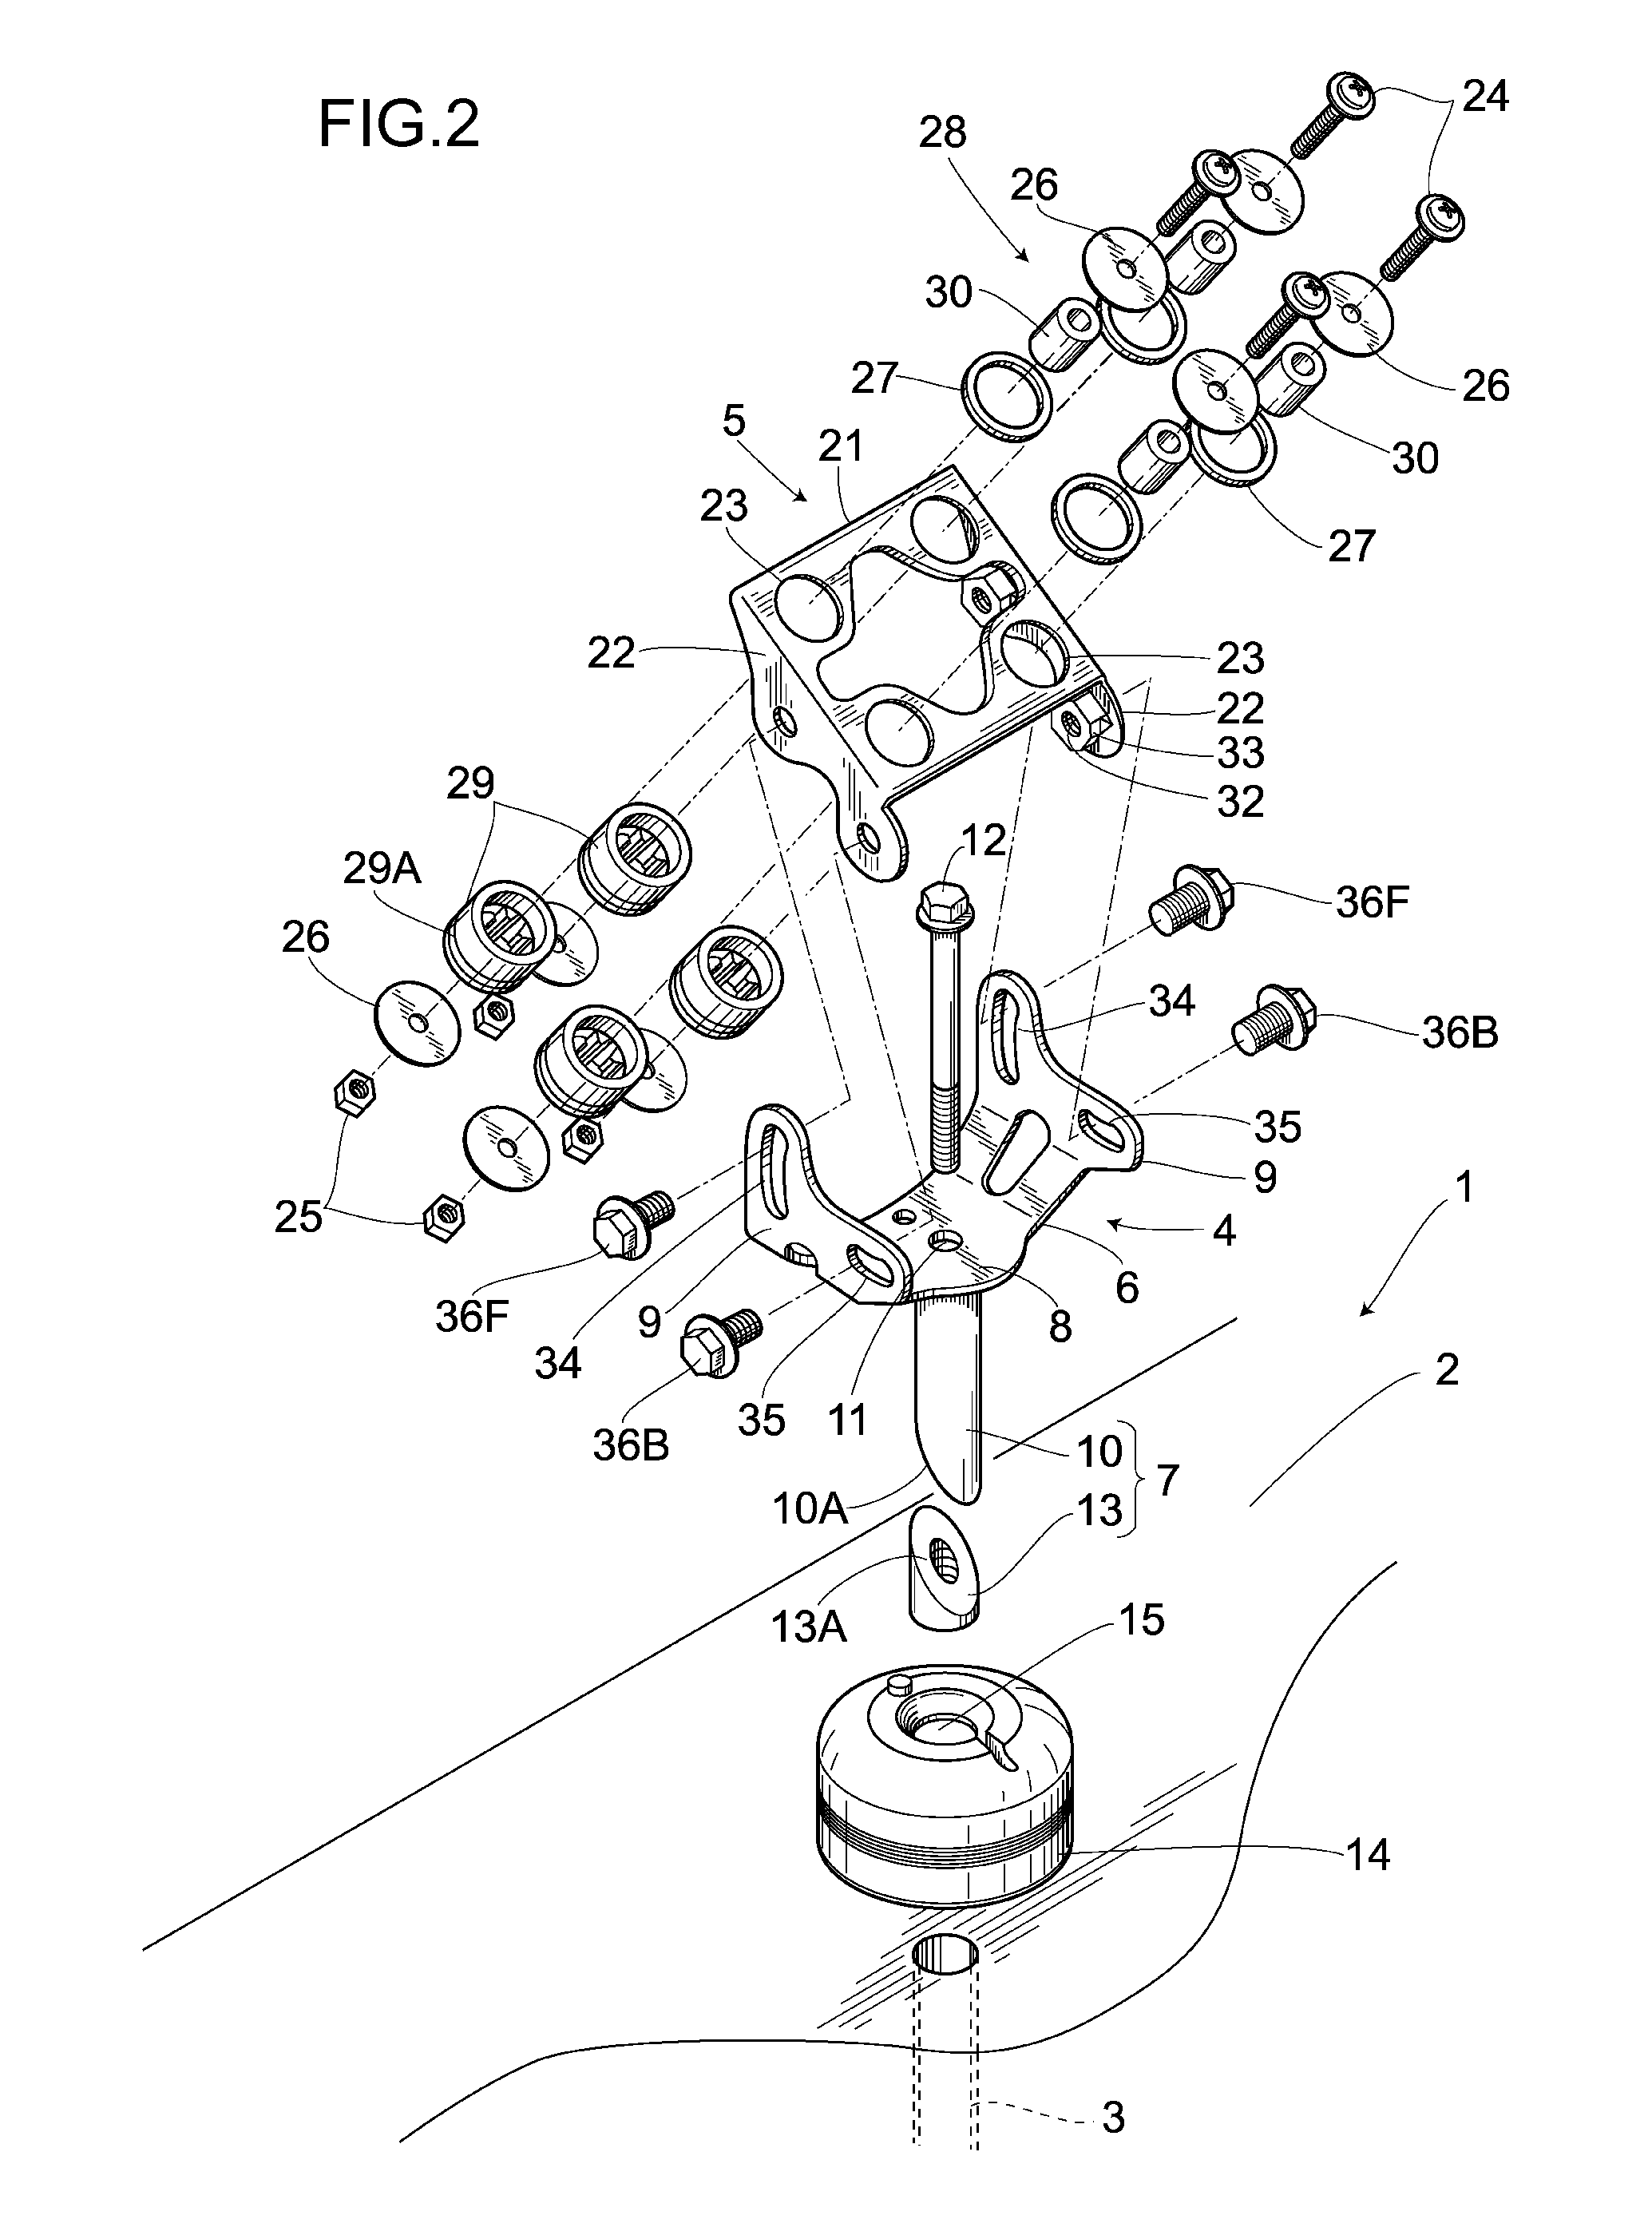 Electrical accessory mounting device for a saddle-type vehicle